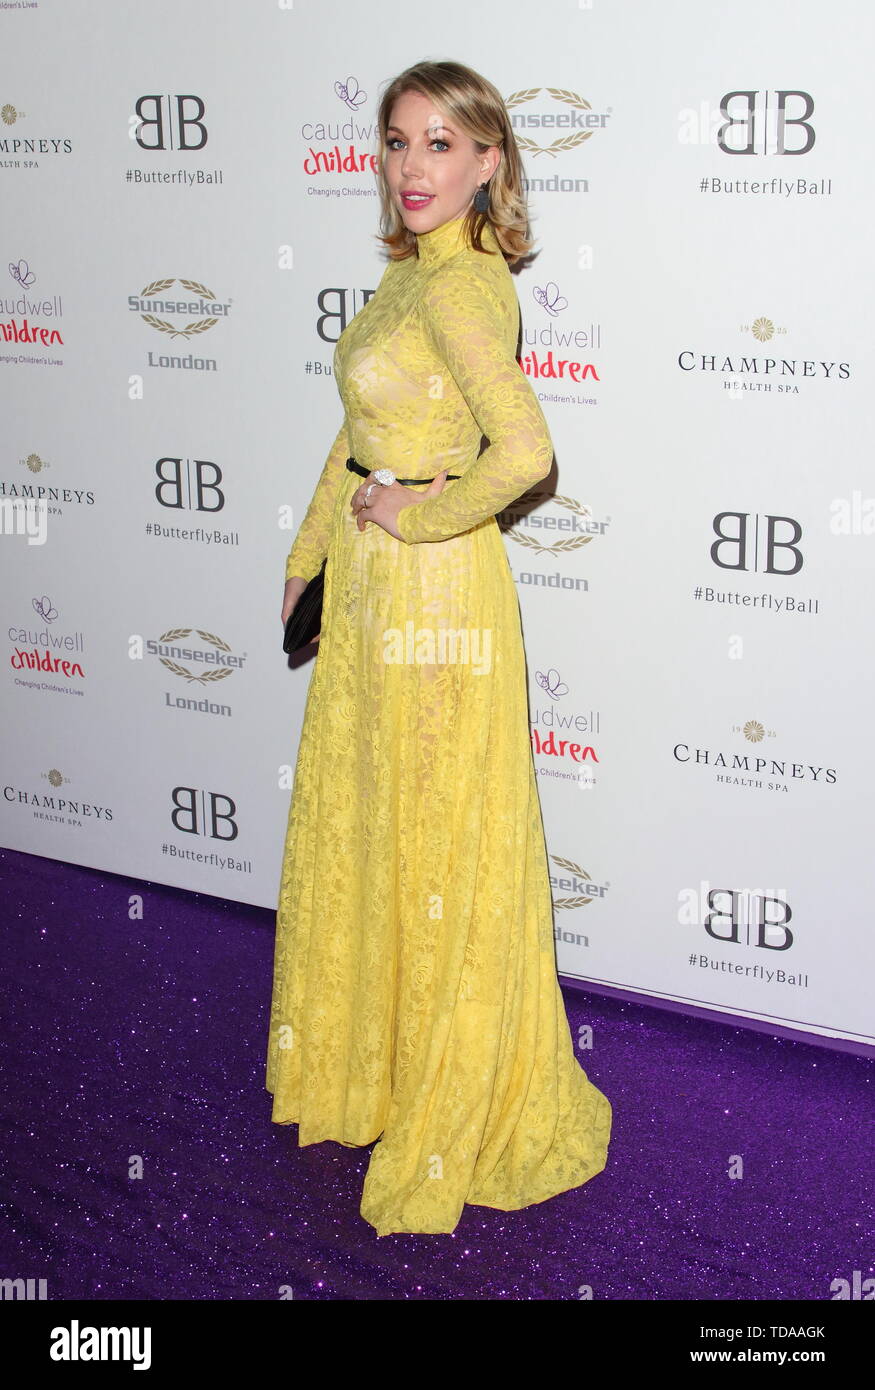 London, UK. 13th June, 2019. Katherine Ryan arrives for the Caudwell Children Butterfly Ball charity event at the Grosvenor House, Park Lane Credit: SOPA Images Limited/Alamy Live News Stock Photo